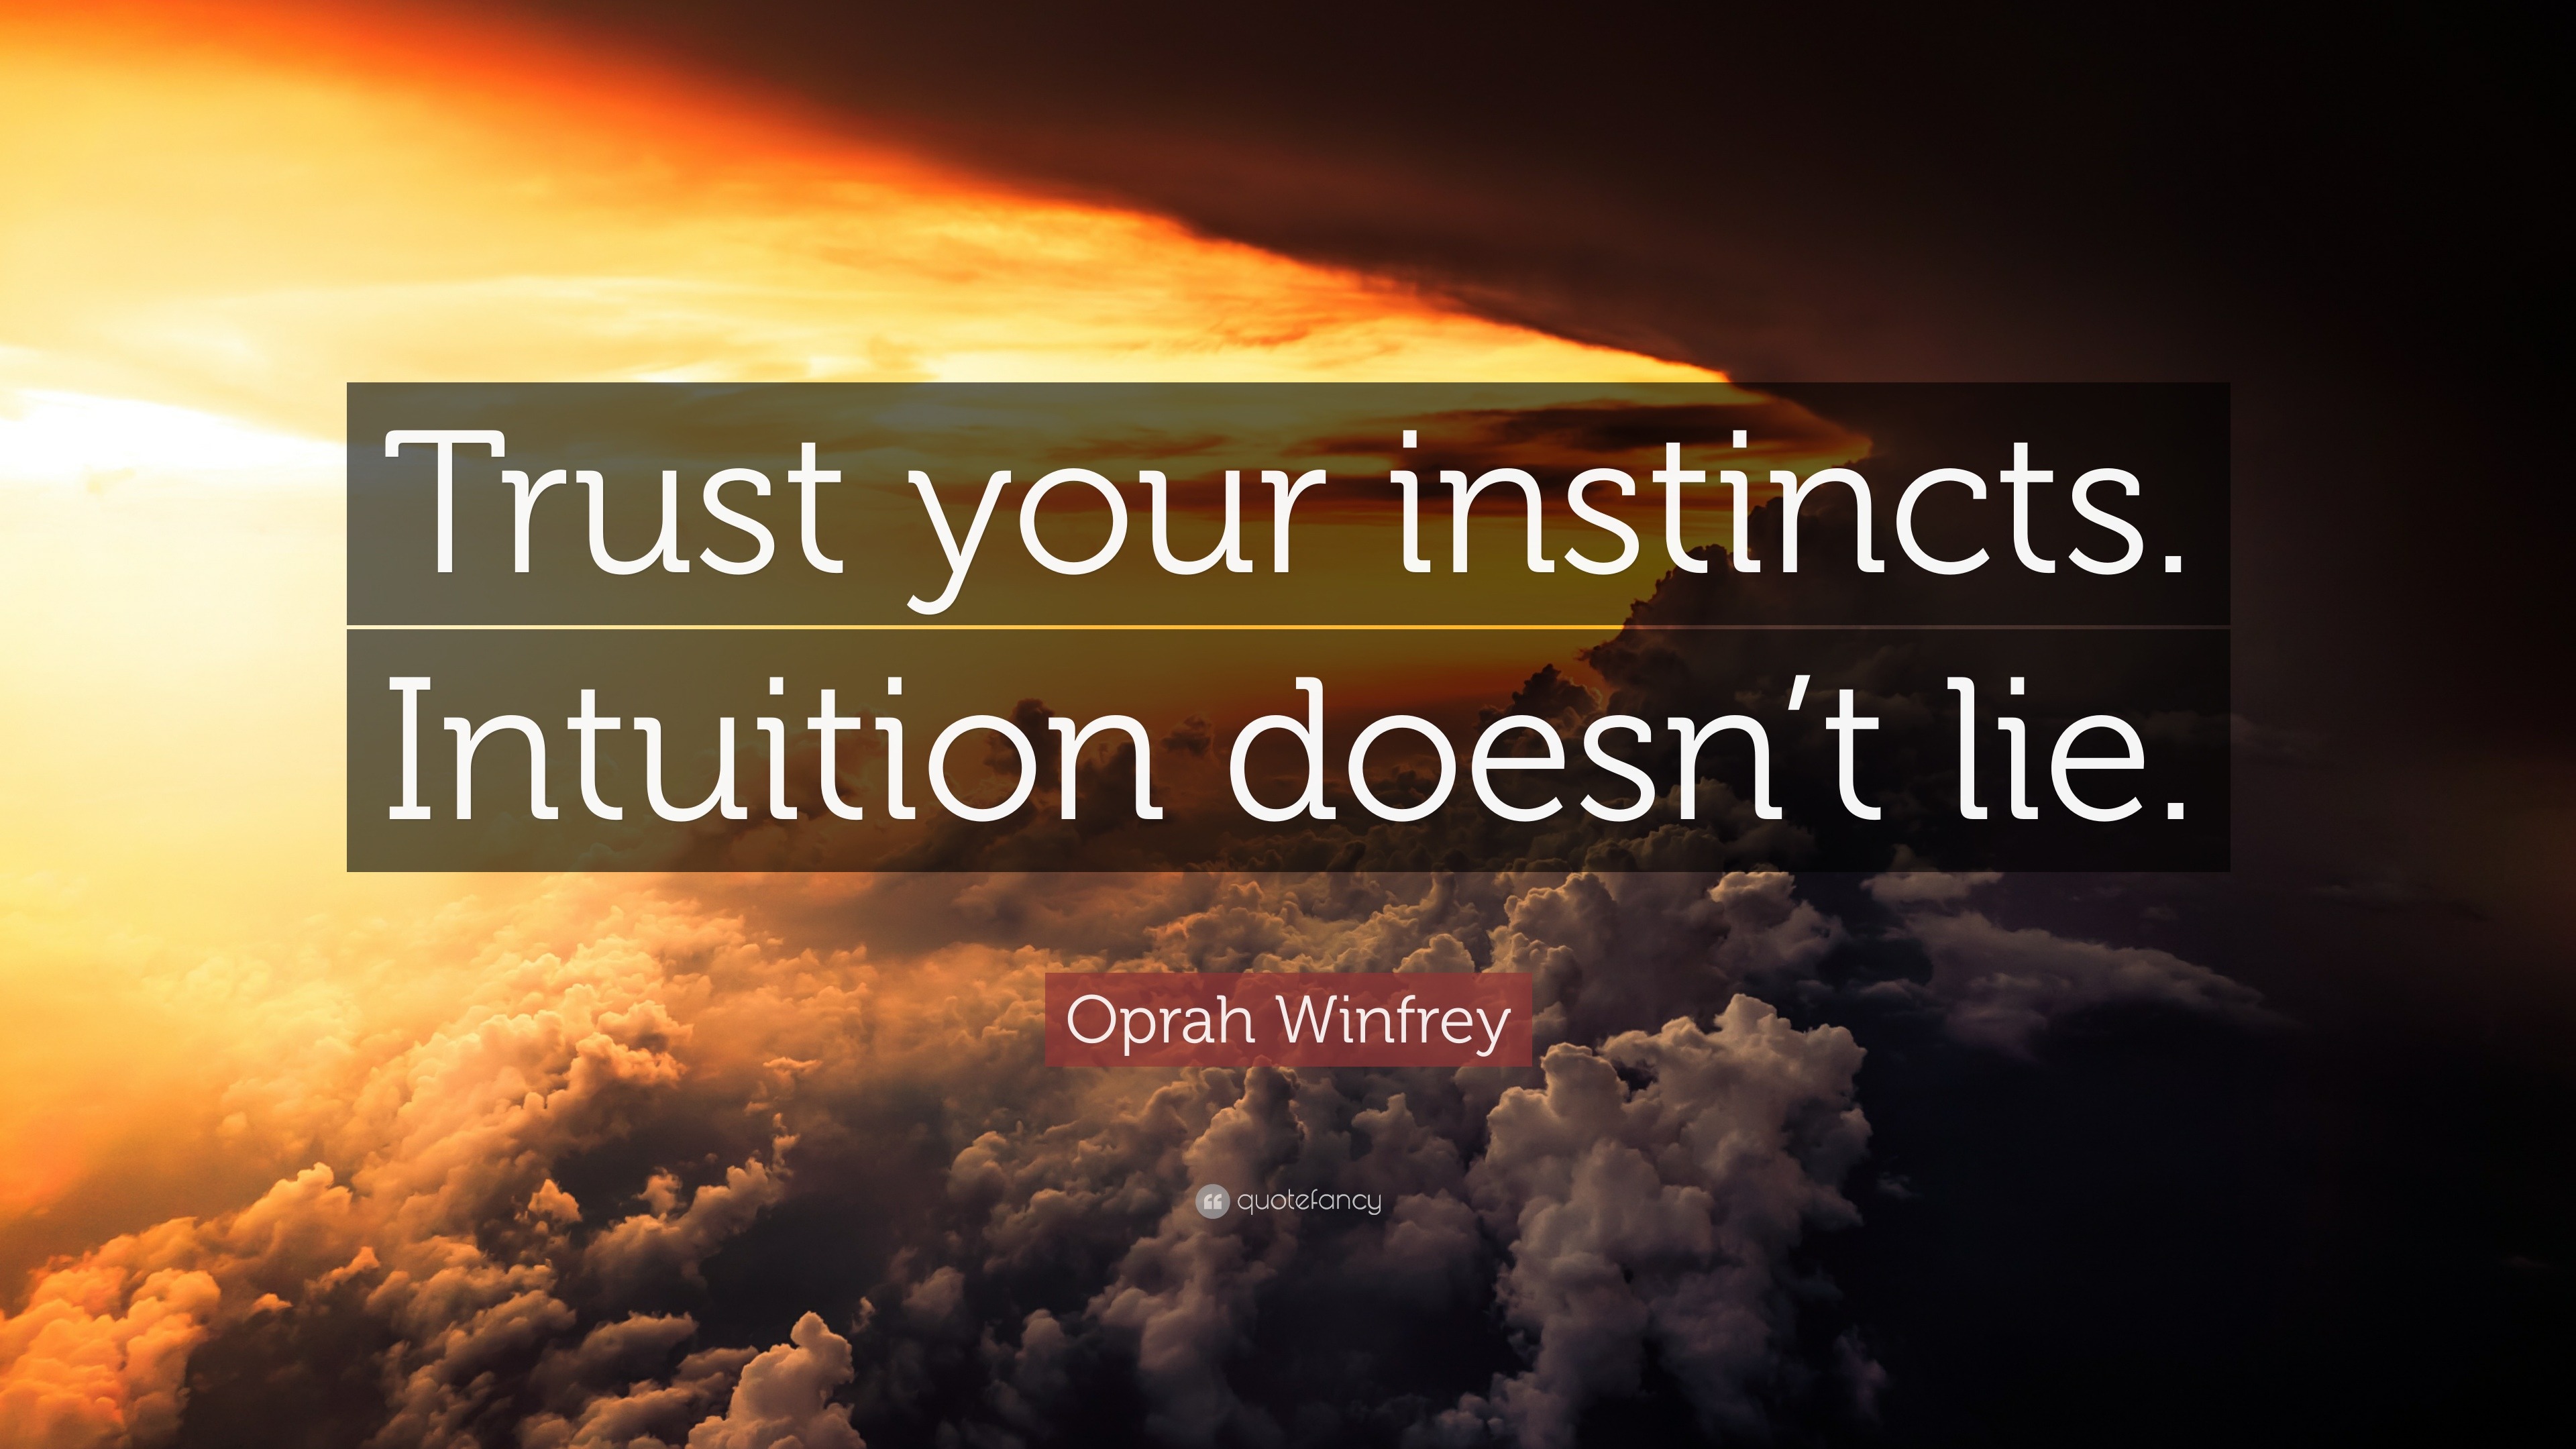 Oprah Winfrey Quote: “Trust your instincts. Intuition doesn’t lie.”